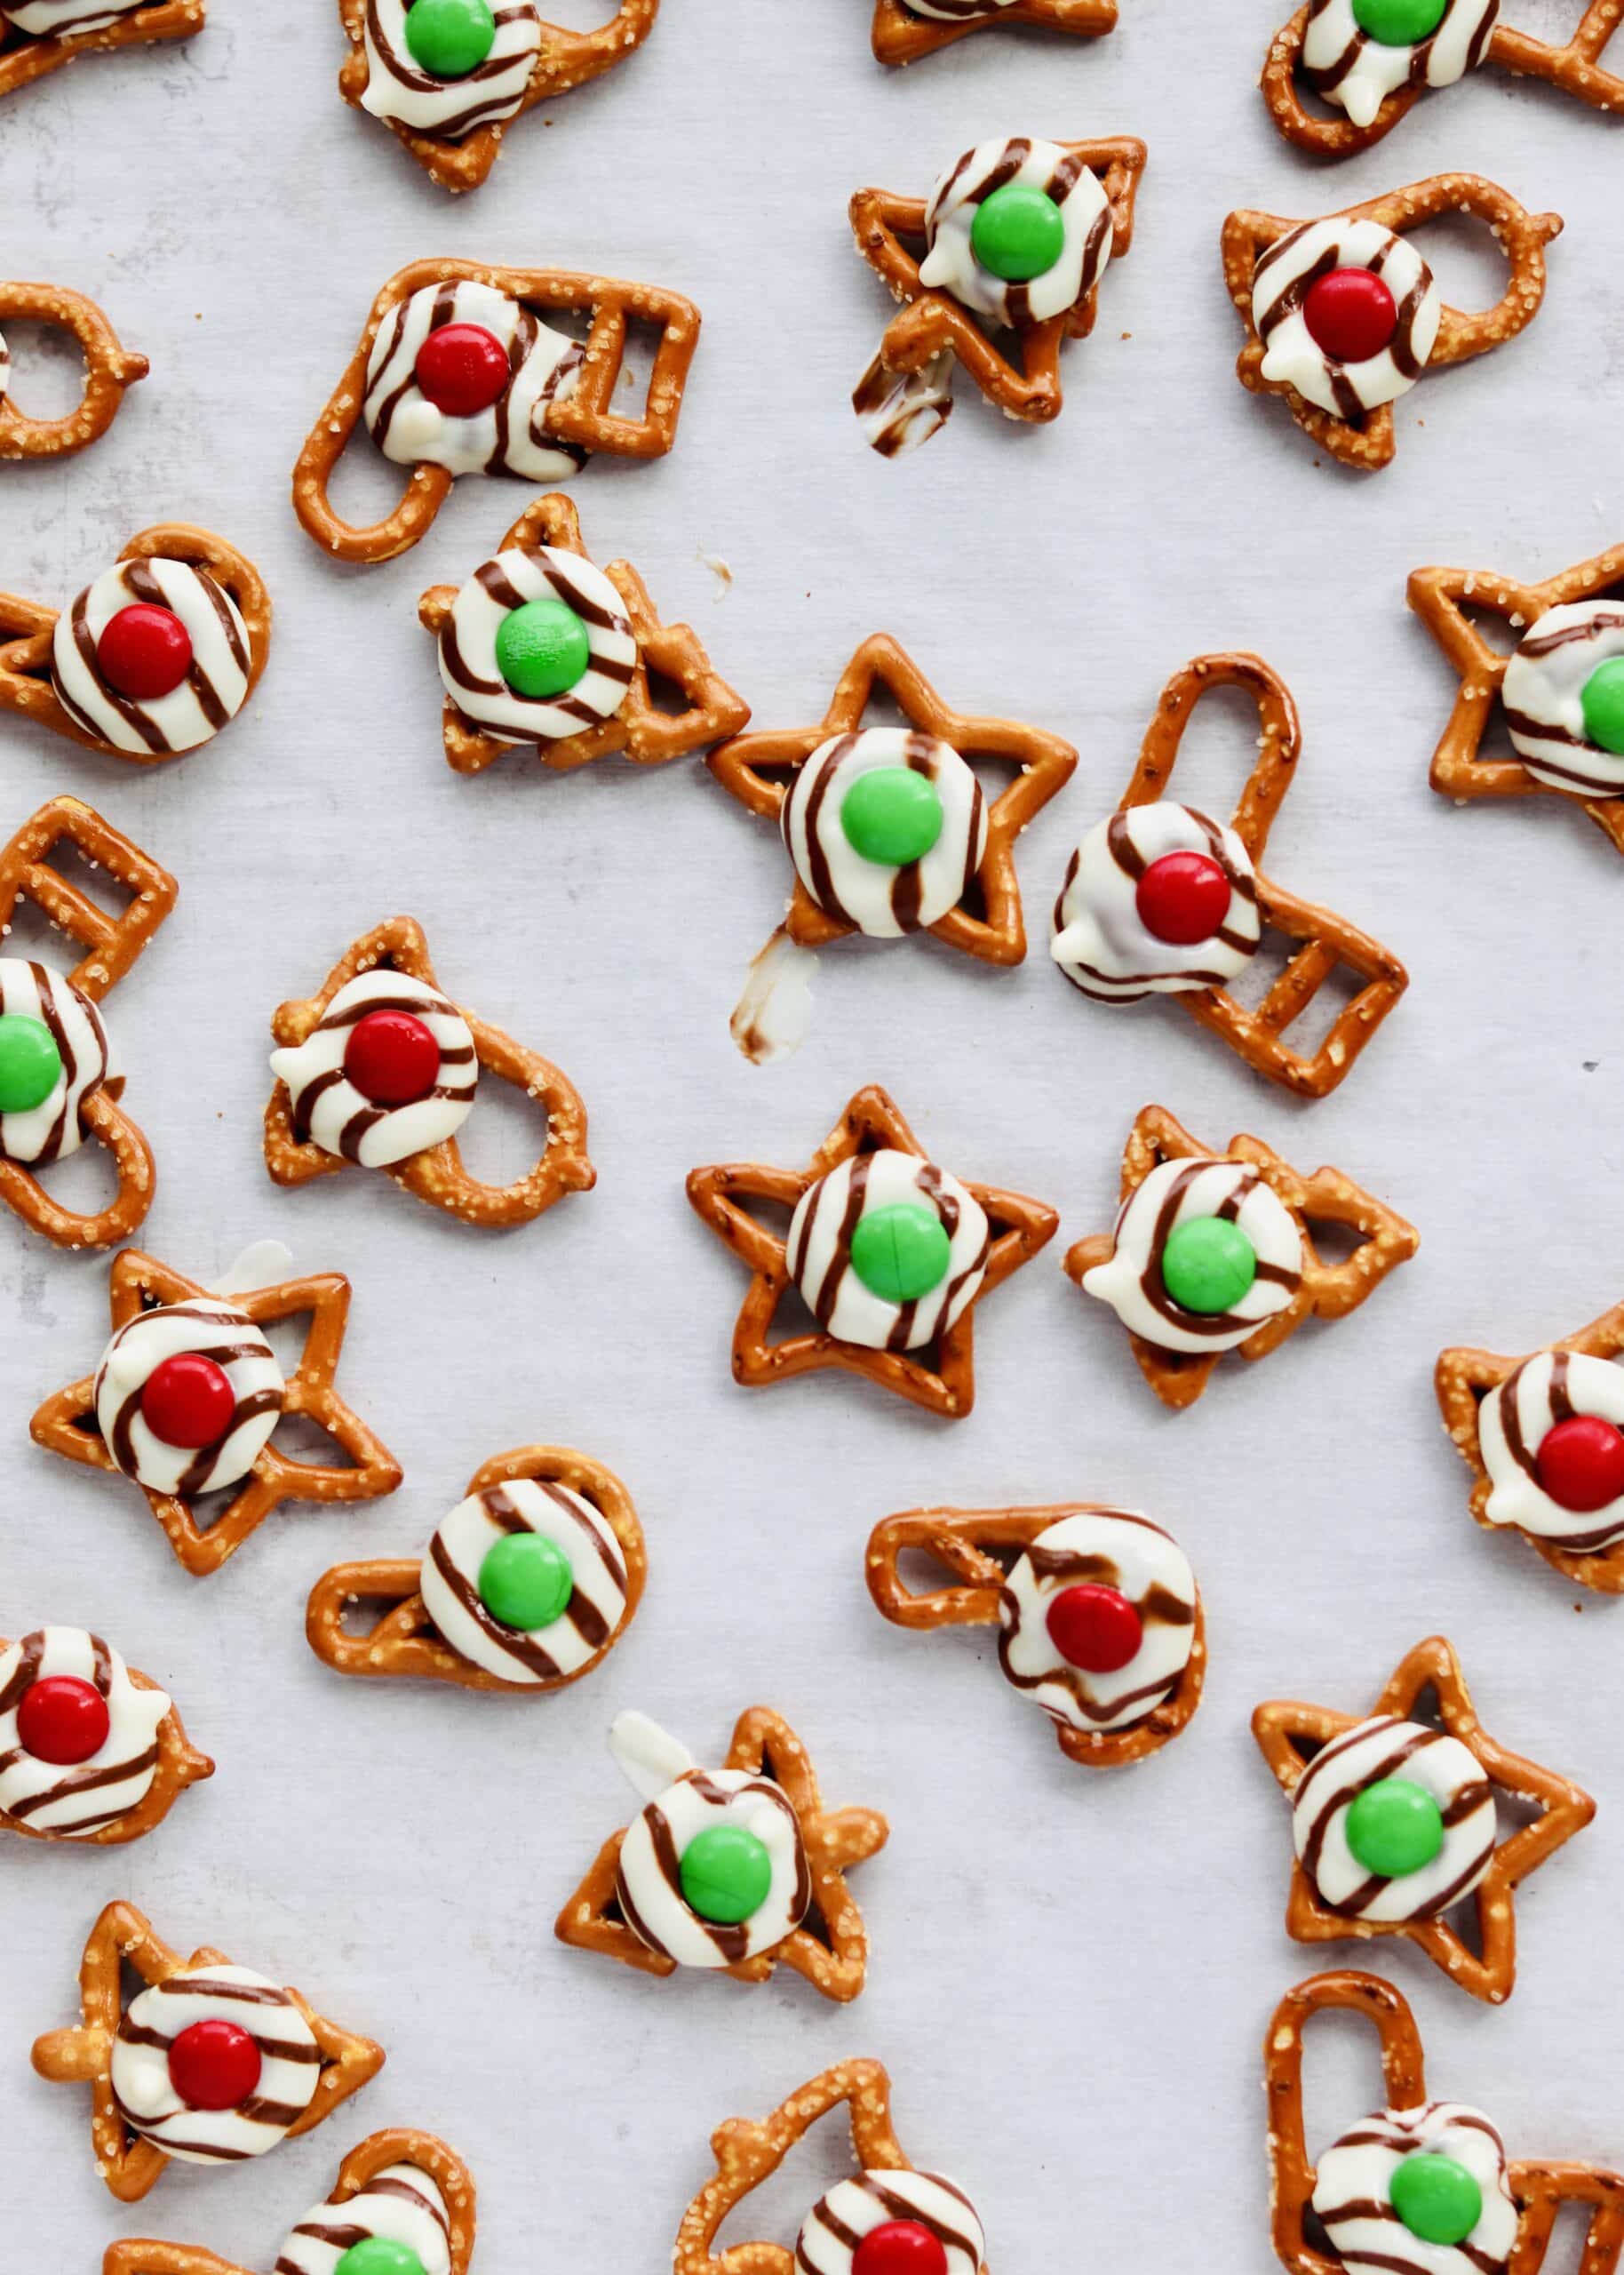 Christmas Pretzel Hugs are the perfect combination of salty and sweet. Easily made with just 3 ingredients and perfect to make ahead for some holiday prep. Recipe at KathleensCravings.com #kathleenscravings #pretzeltreats #pretzelhugs #christmascookies #holidaycookies #hersheyskisses